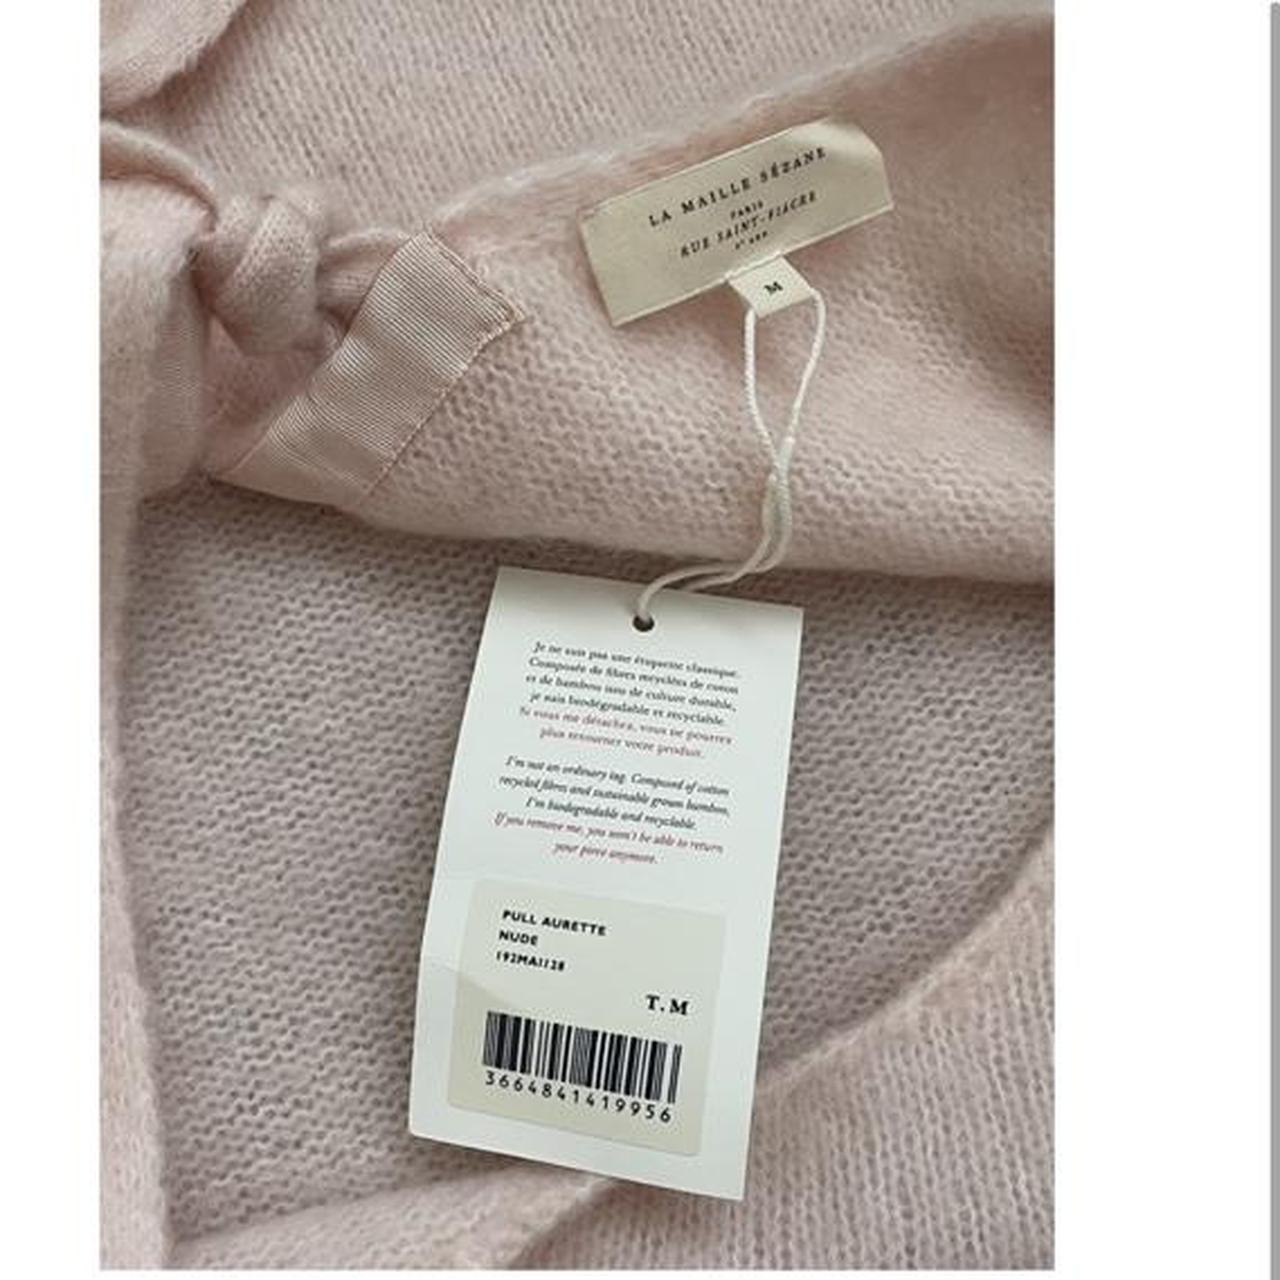 Sezane jumper with a deep V-back featuring bow... - Depop